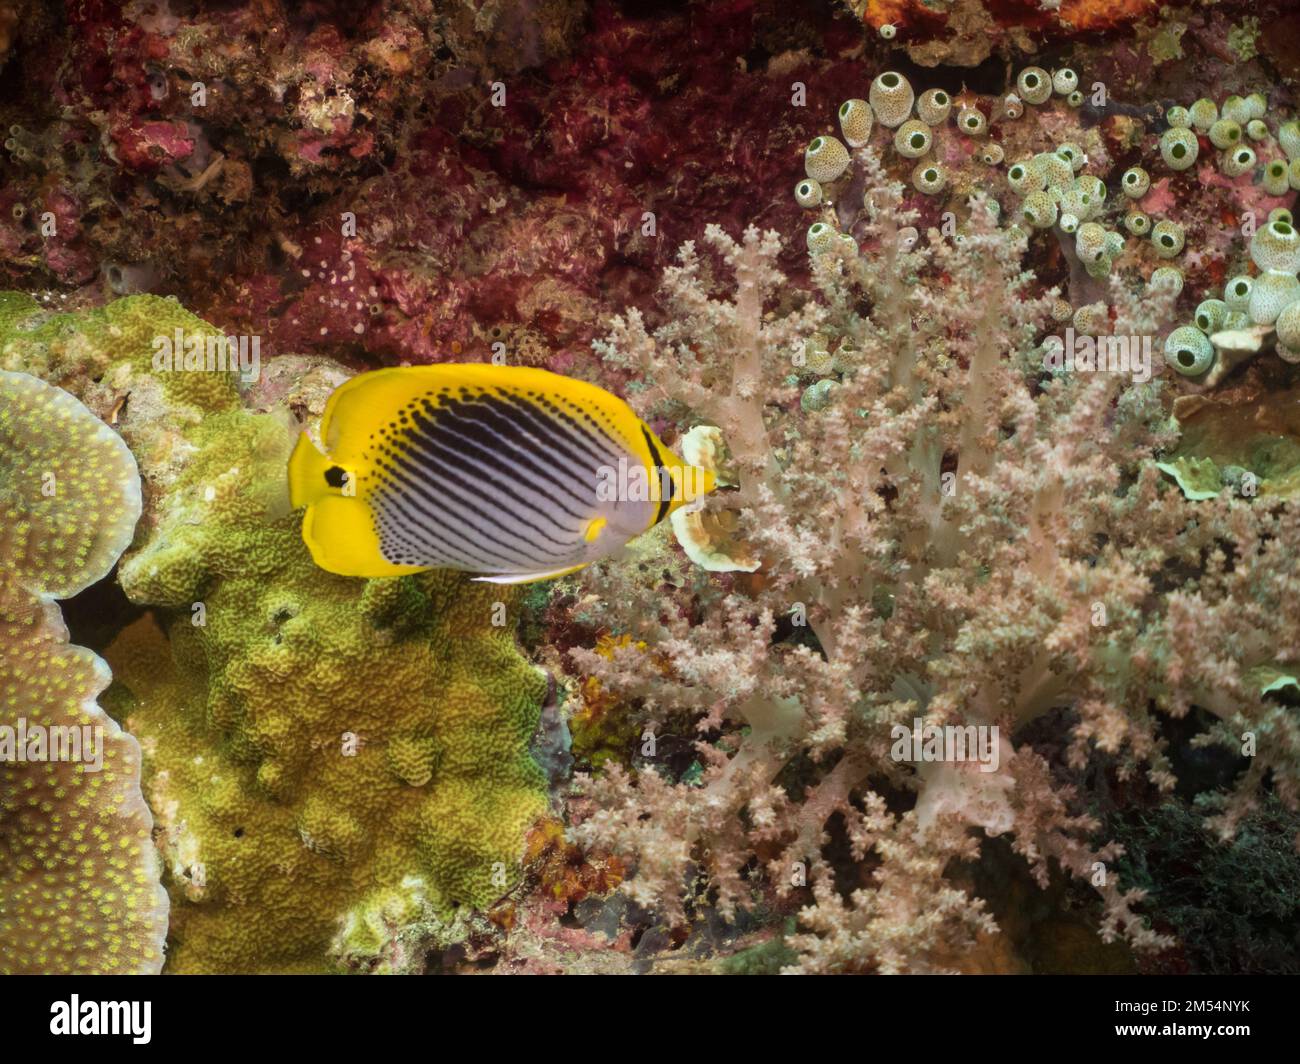 Spot-tailed butterflyfish, Chaetodon ocellicaudus, eating coral in Indonesia Stock Photo